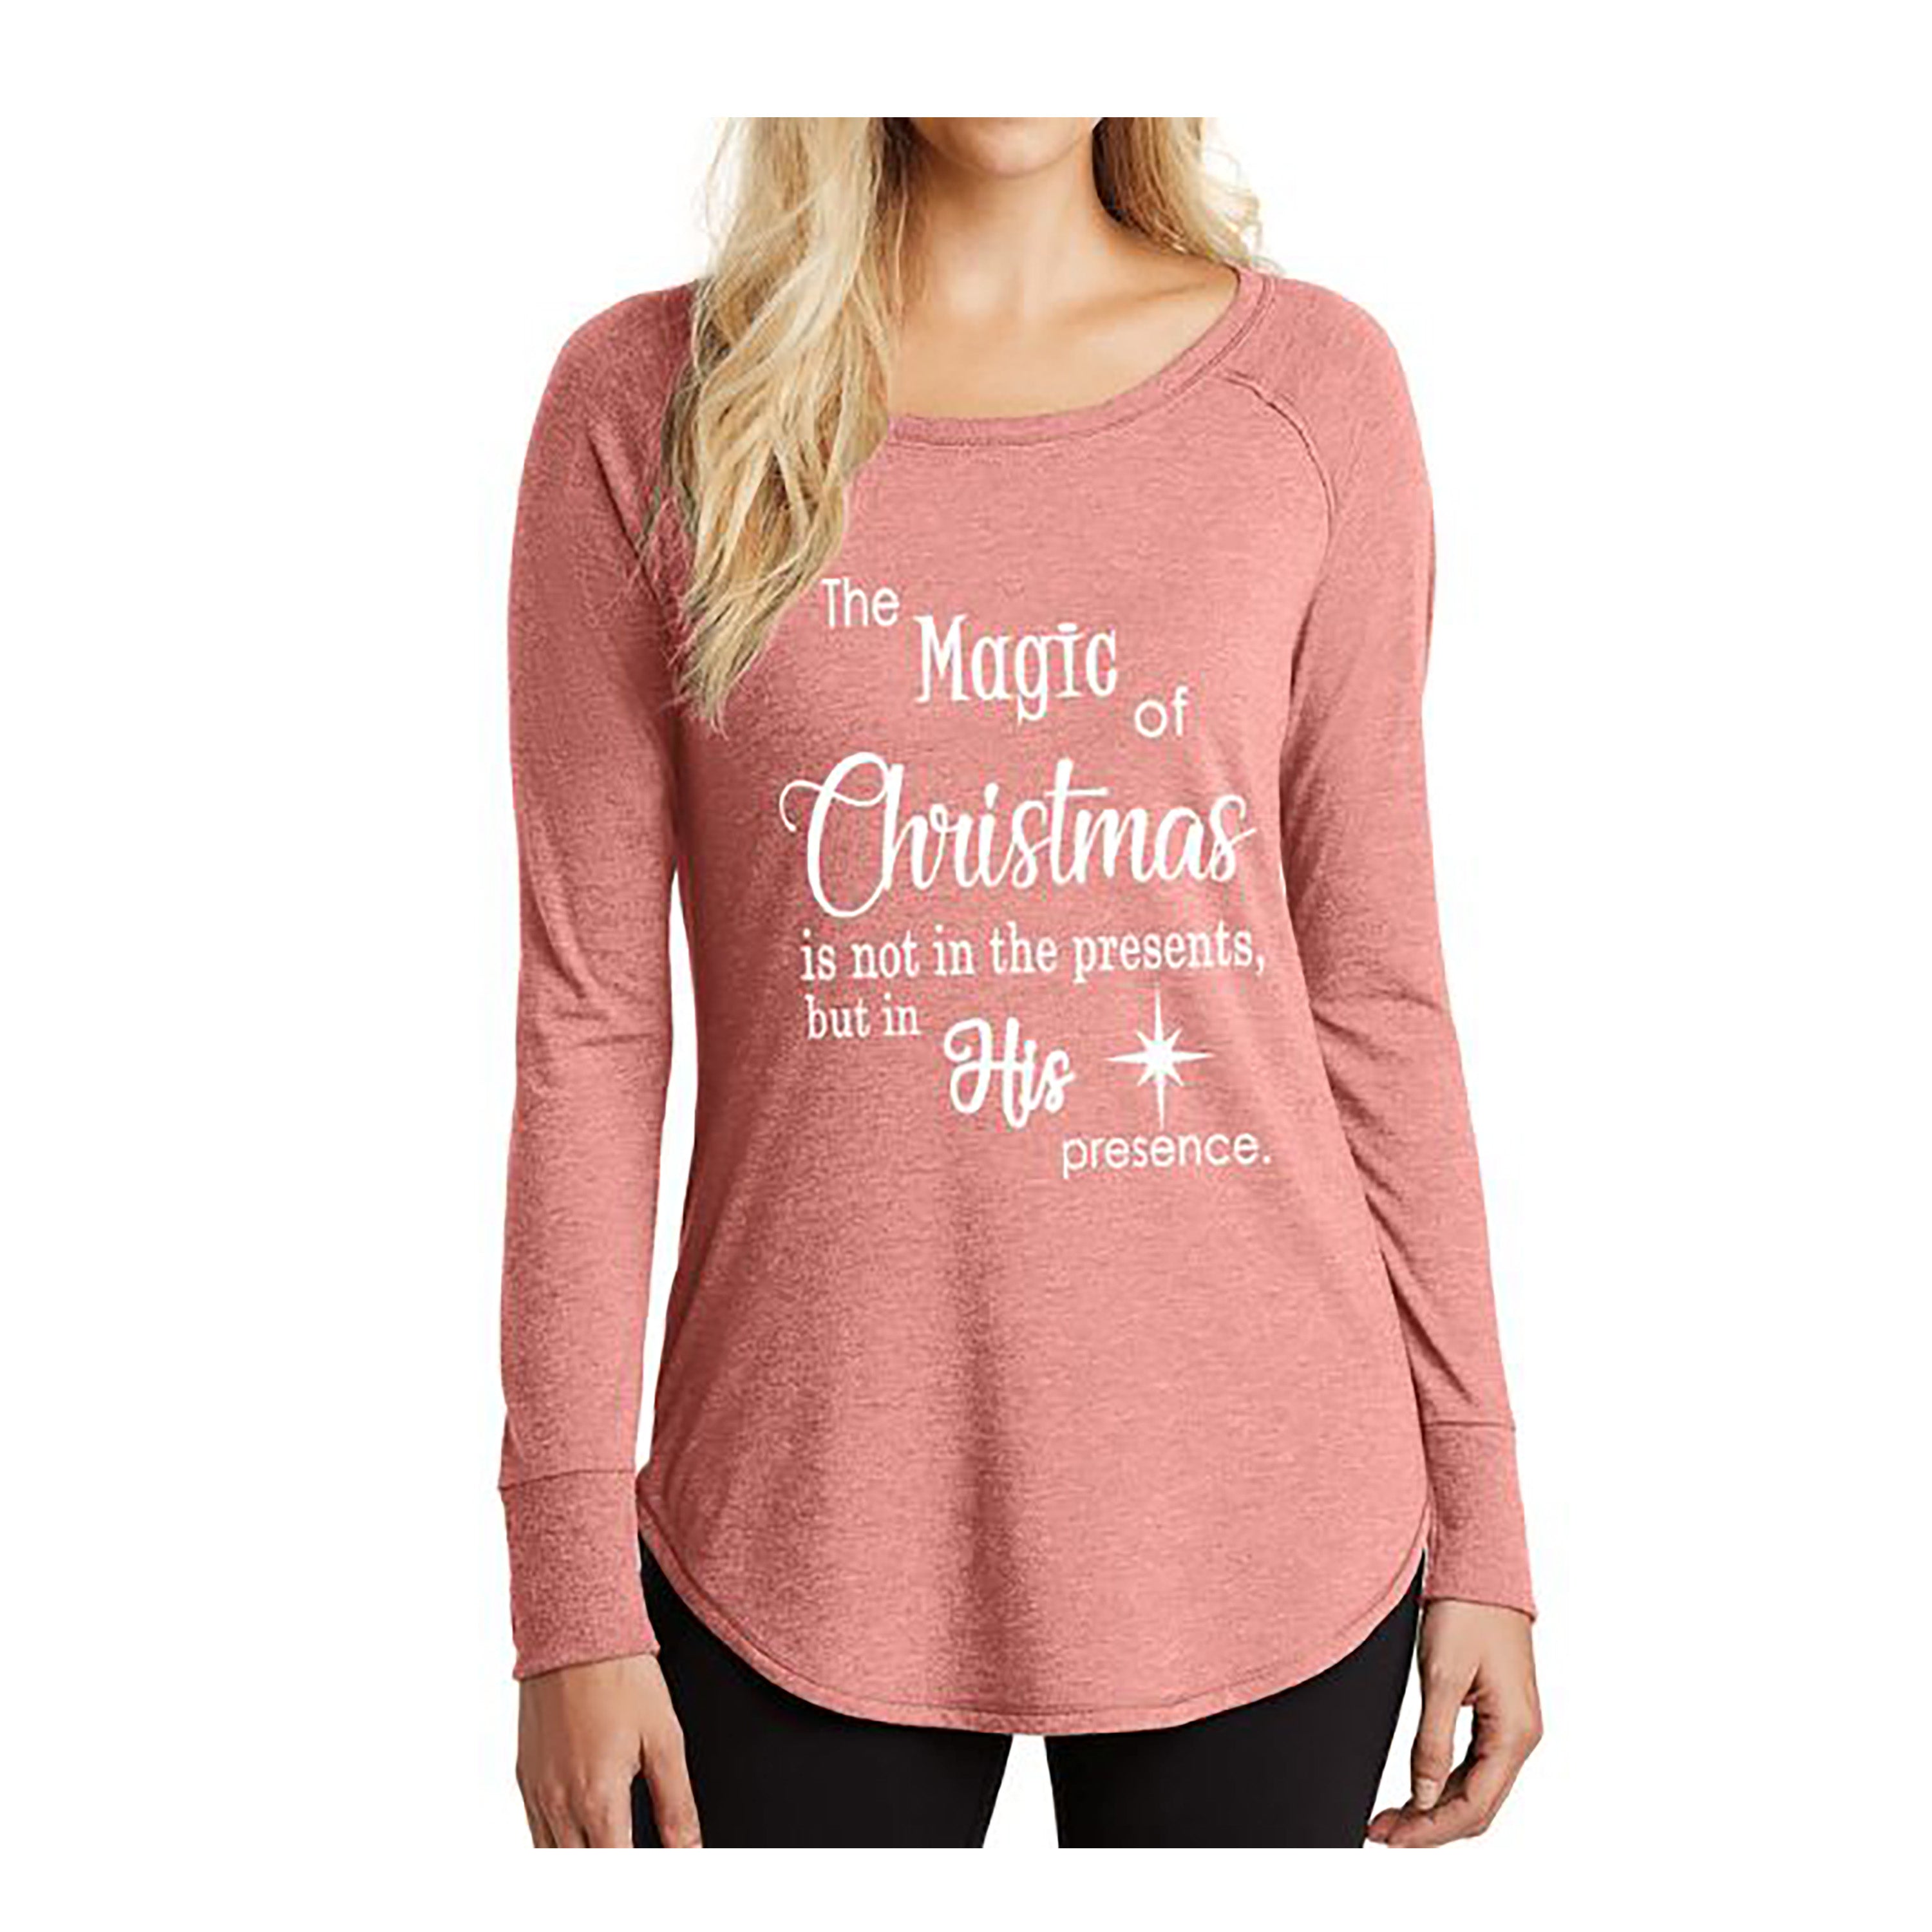 'The magic of Christmas in his presence''- Stylish Long-Sleeve Tee